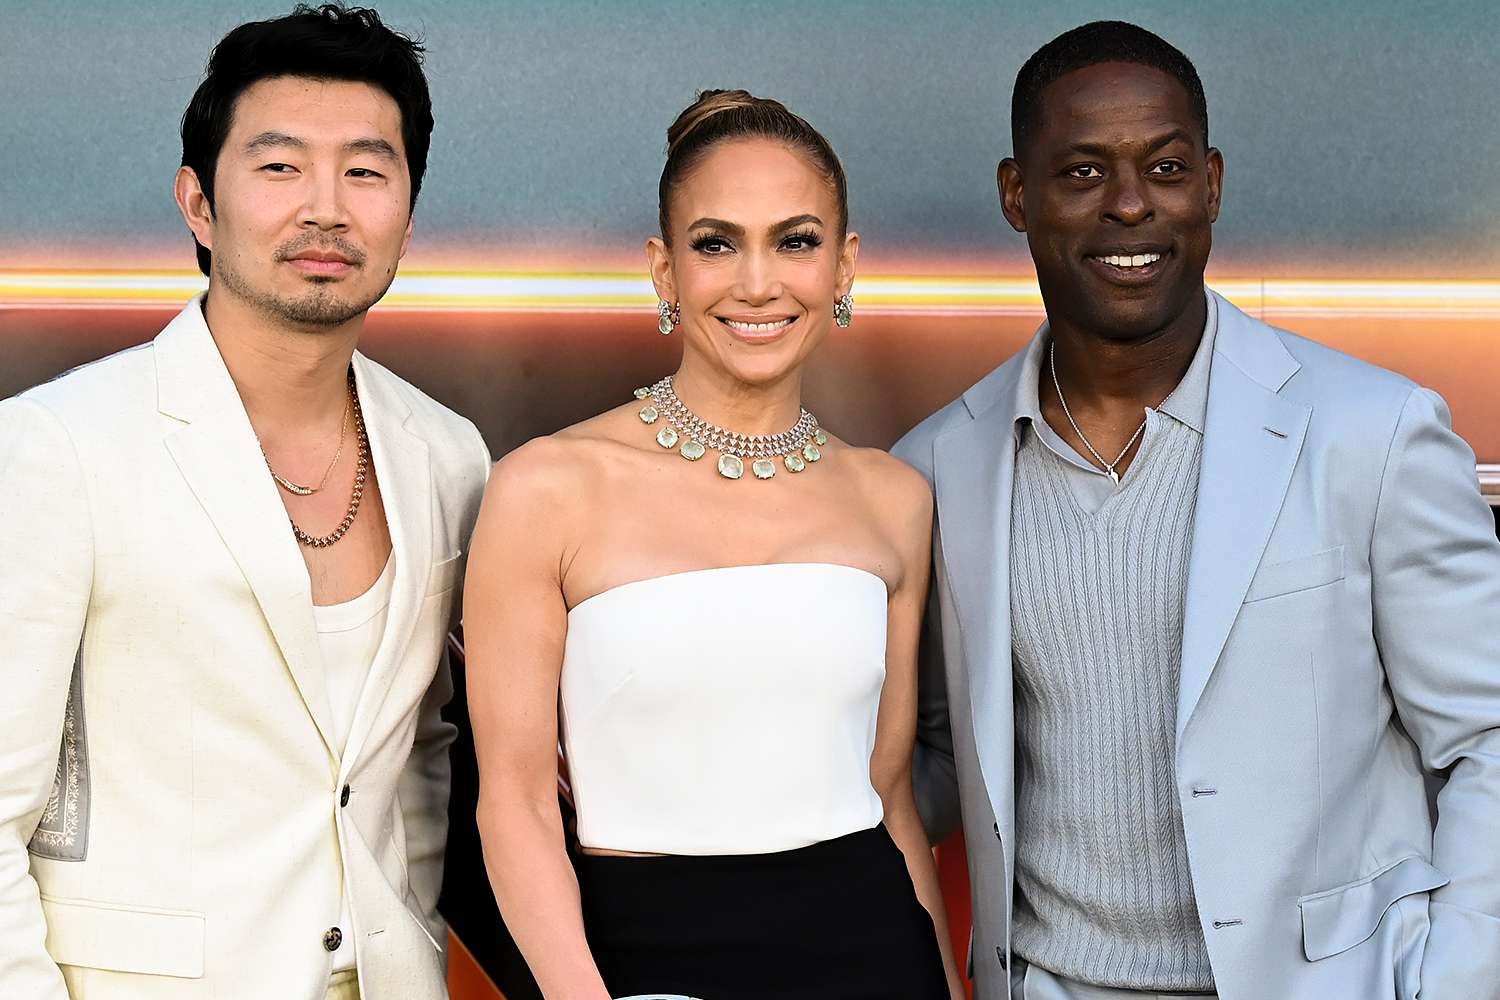 See Jennifer Lopez, Simu Liu, Sterling K. Brown and More Arriving at the “Atlas ”Premiere in L.A.